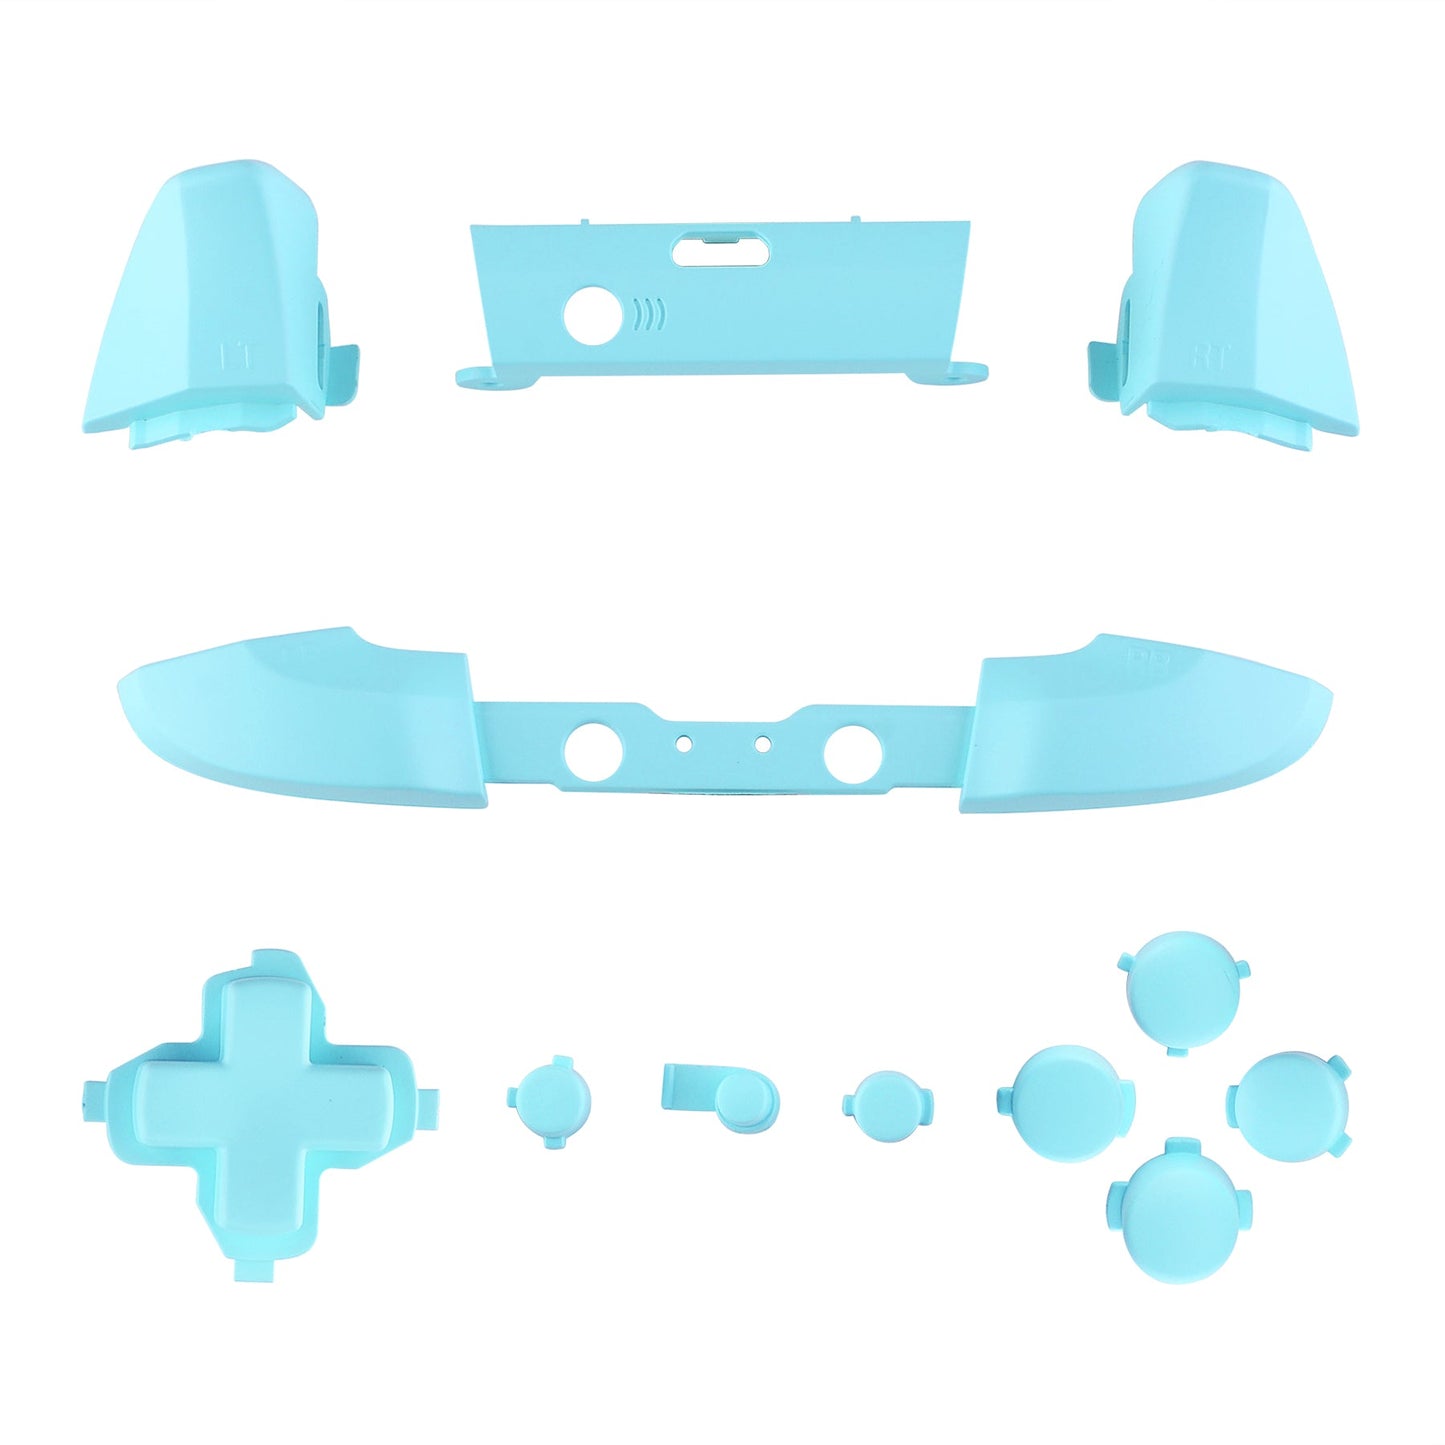 eXtremeRate Retail LB RB LT RT Bumpers Triggers D-Pad ABXY Start Back Sync Buttons, Heaven Blue Full Set Buttons Repair Kits with Tools for Xbox One S & Xbox One X Controller (Model 1708) - SXOJ0218